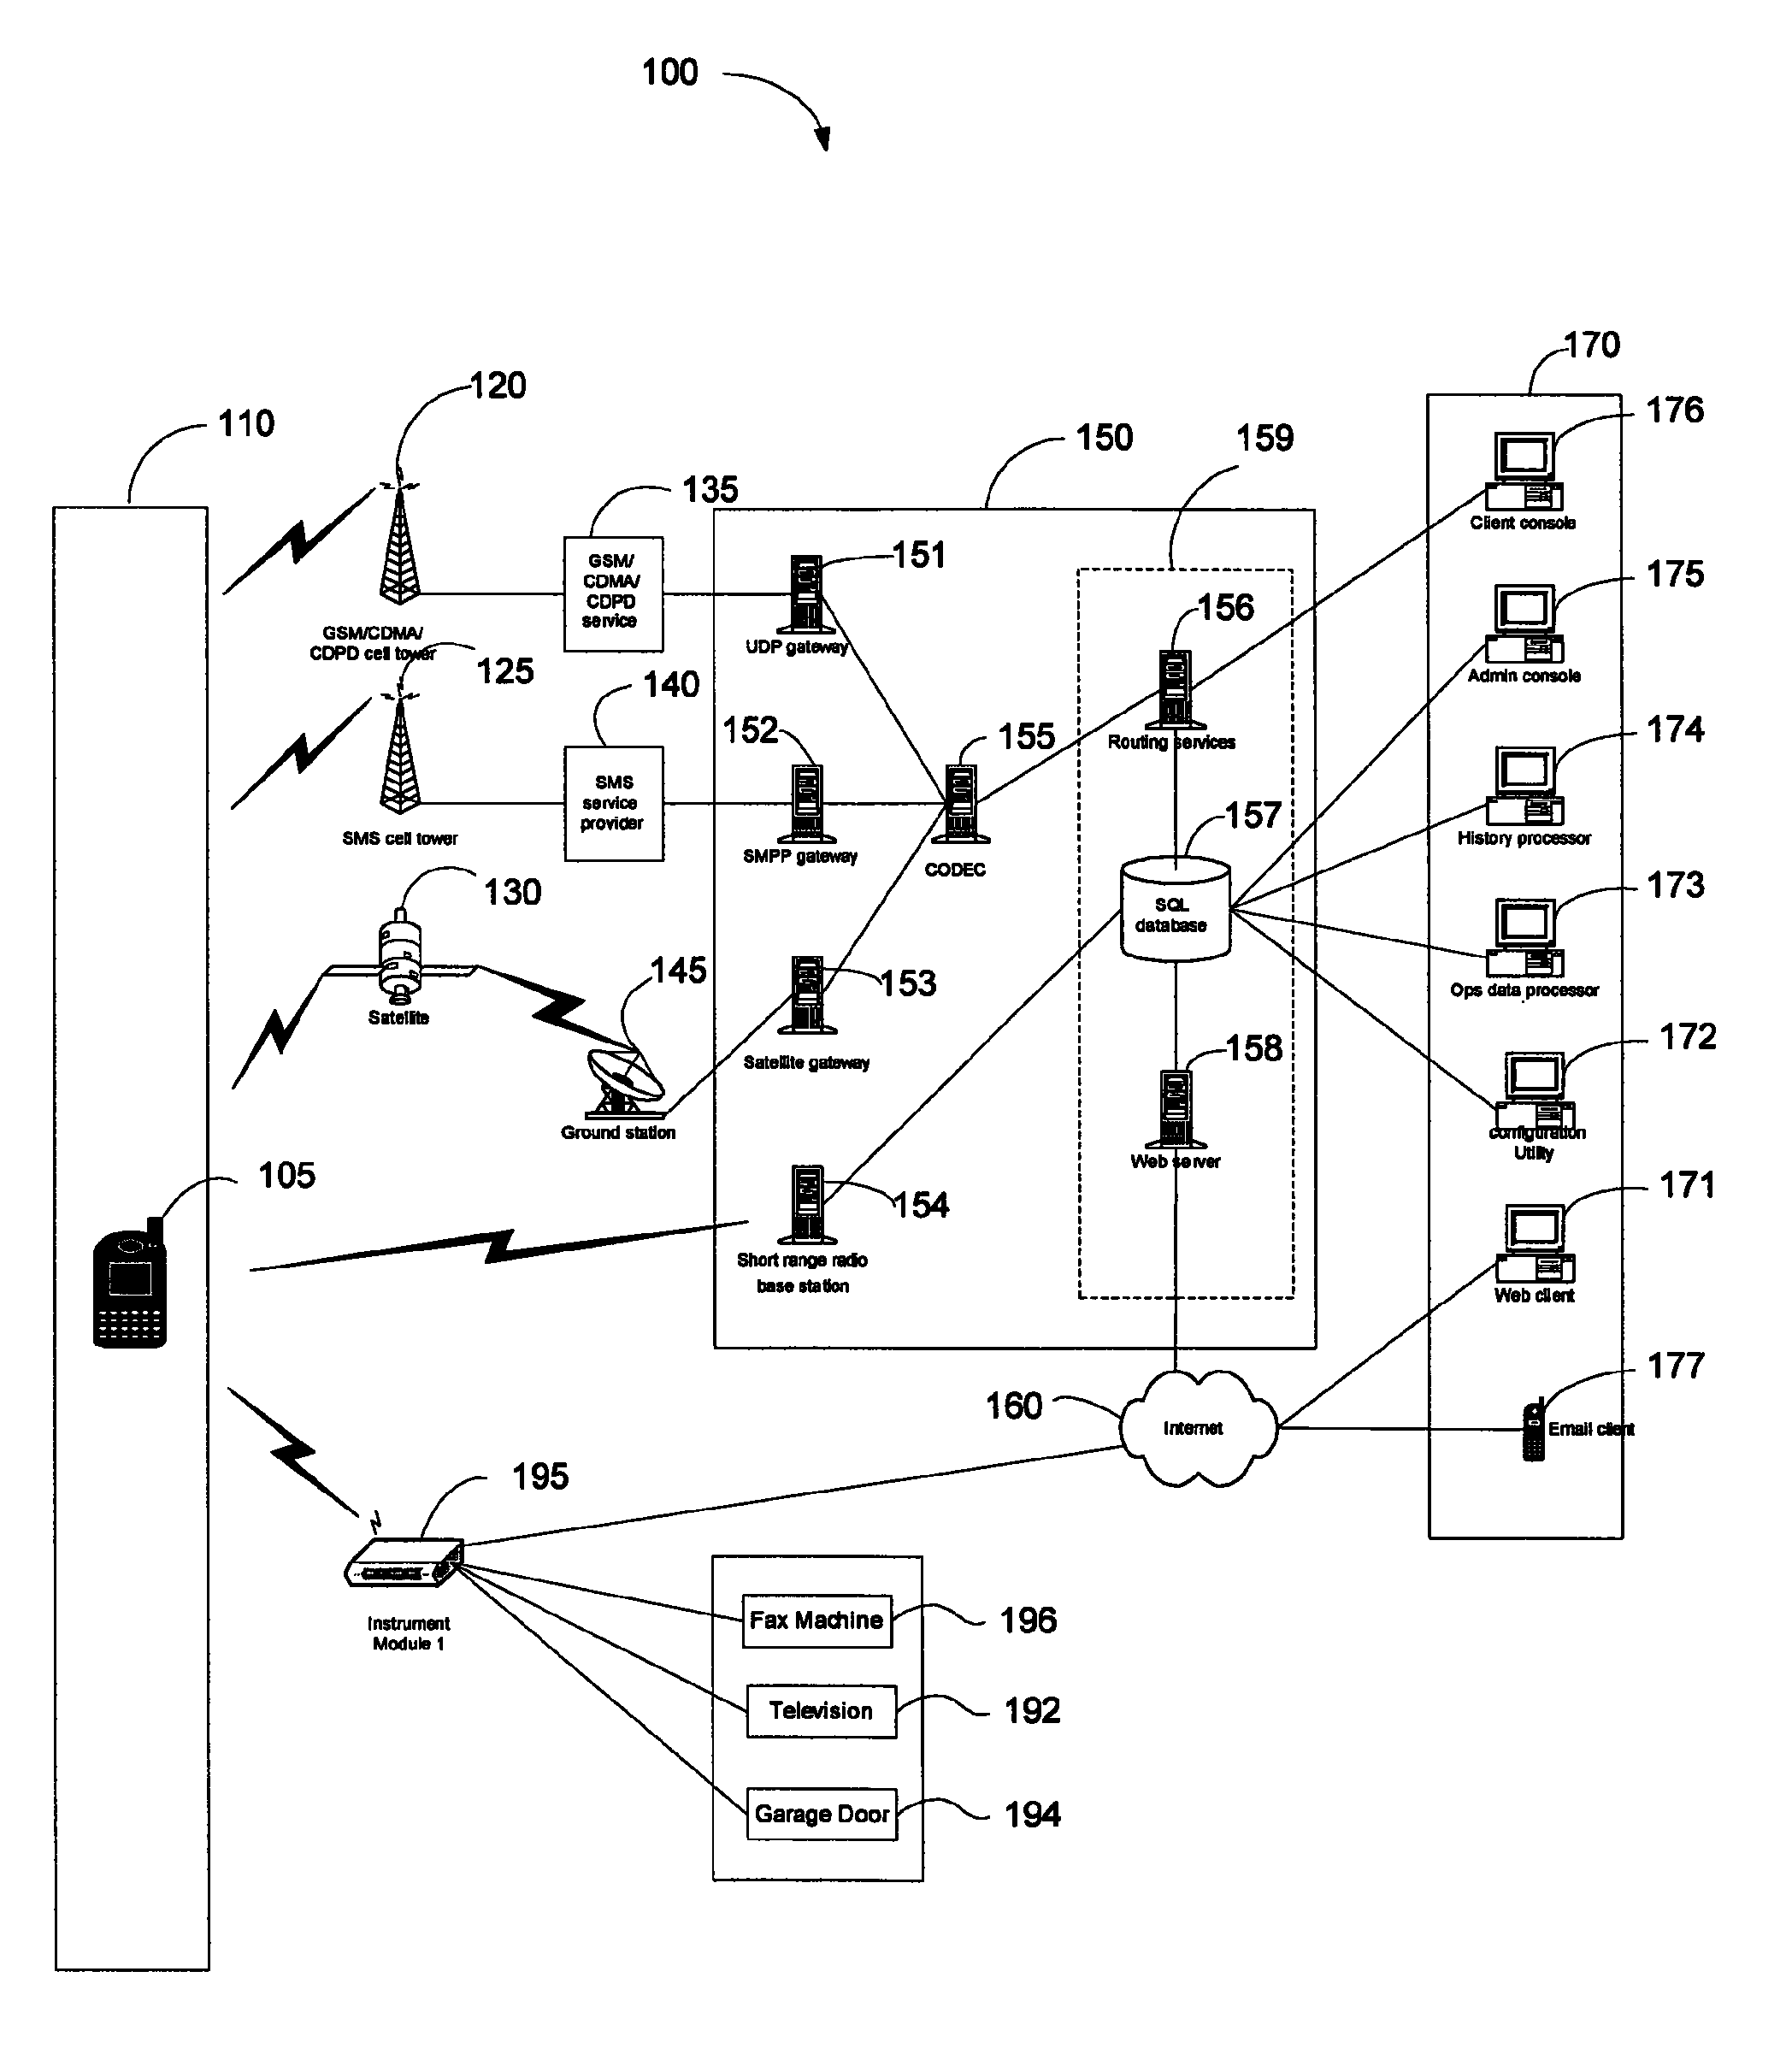 Method and system to monitor and control devices utilizing wireless media